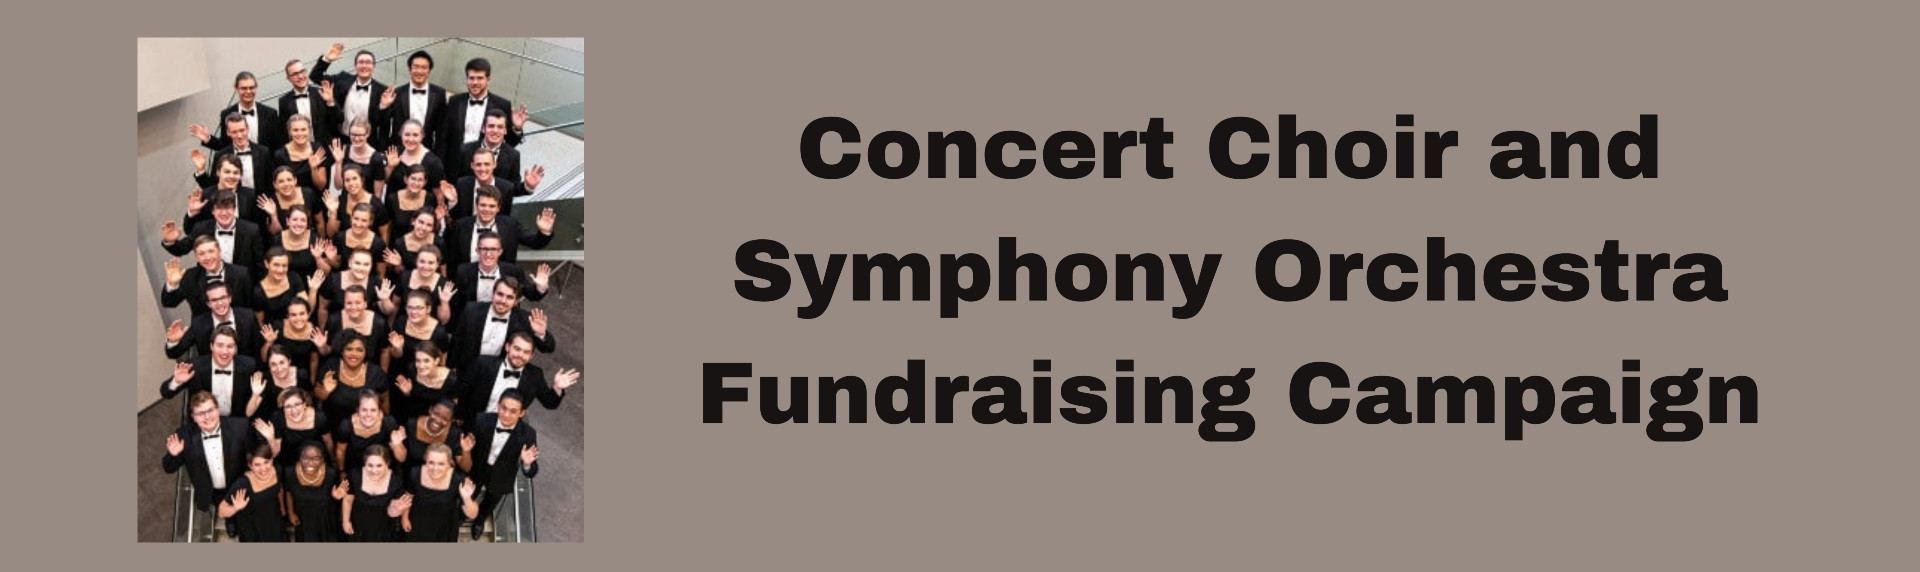 Concert Choir and Symphony Orchestra Fundraising Campaign header